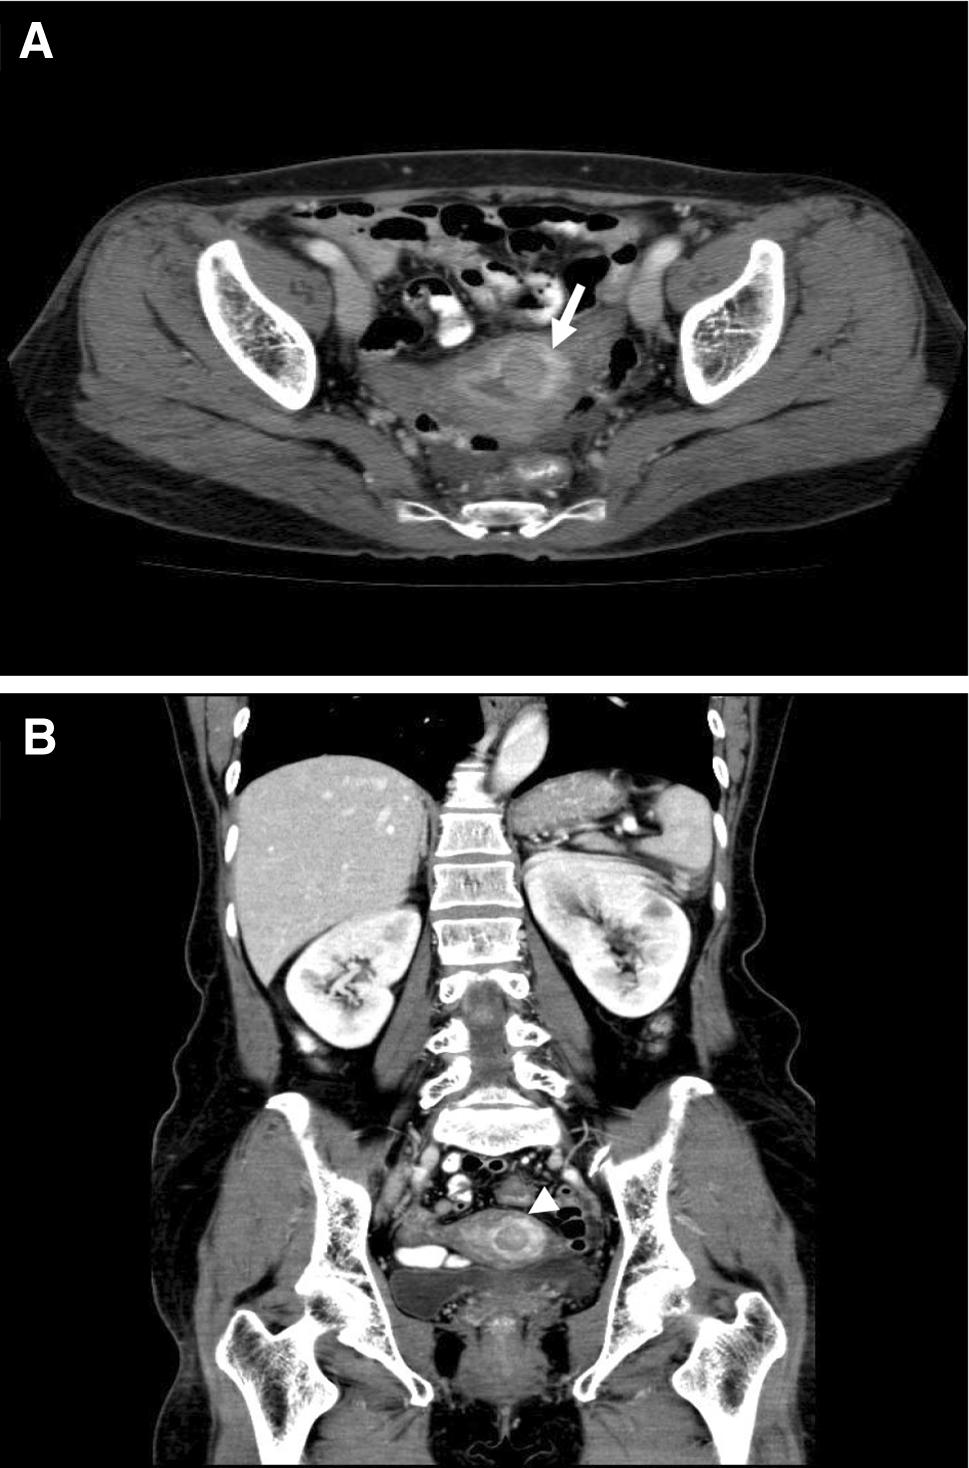 Case Report A 56-year-old woman, gravida 4, para 2, was admitted to our institute in August 2012 for management of abnormal vaginal bleeding and uterine malignancy tumor.